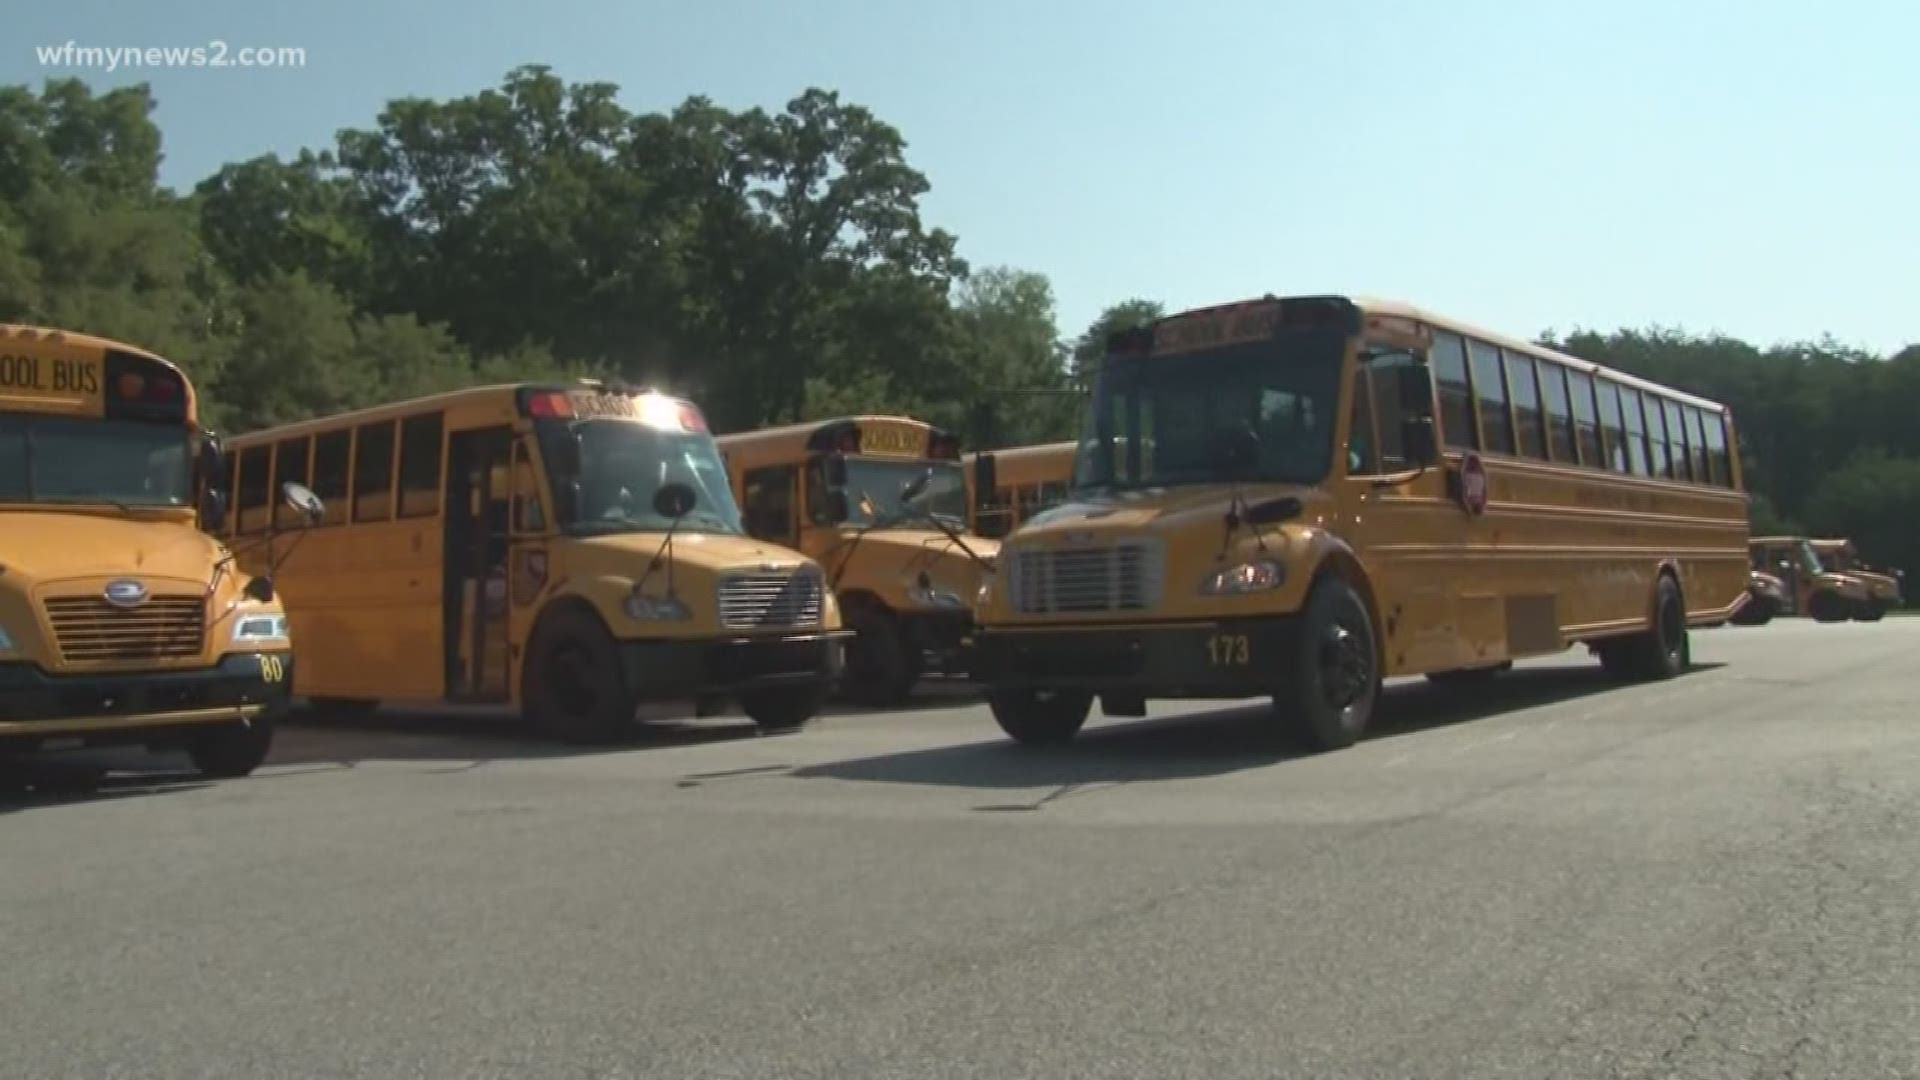 School bus drivers deal with unruly students, parents wondering where they are, and making sure they're on time.  
But a school bus driver in Danville, Virginia faced a student grabbing her hair and hitting her over and over again.
After seeing that, we wanted to know what bus drivers deal with, every day.